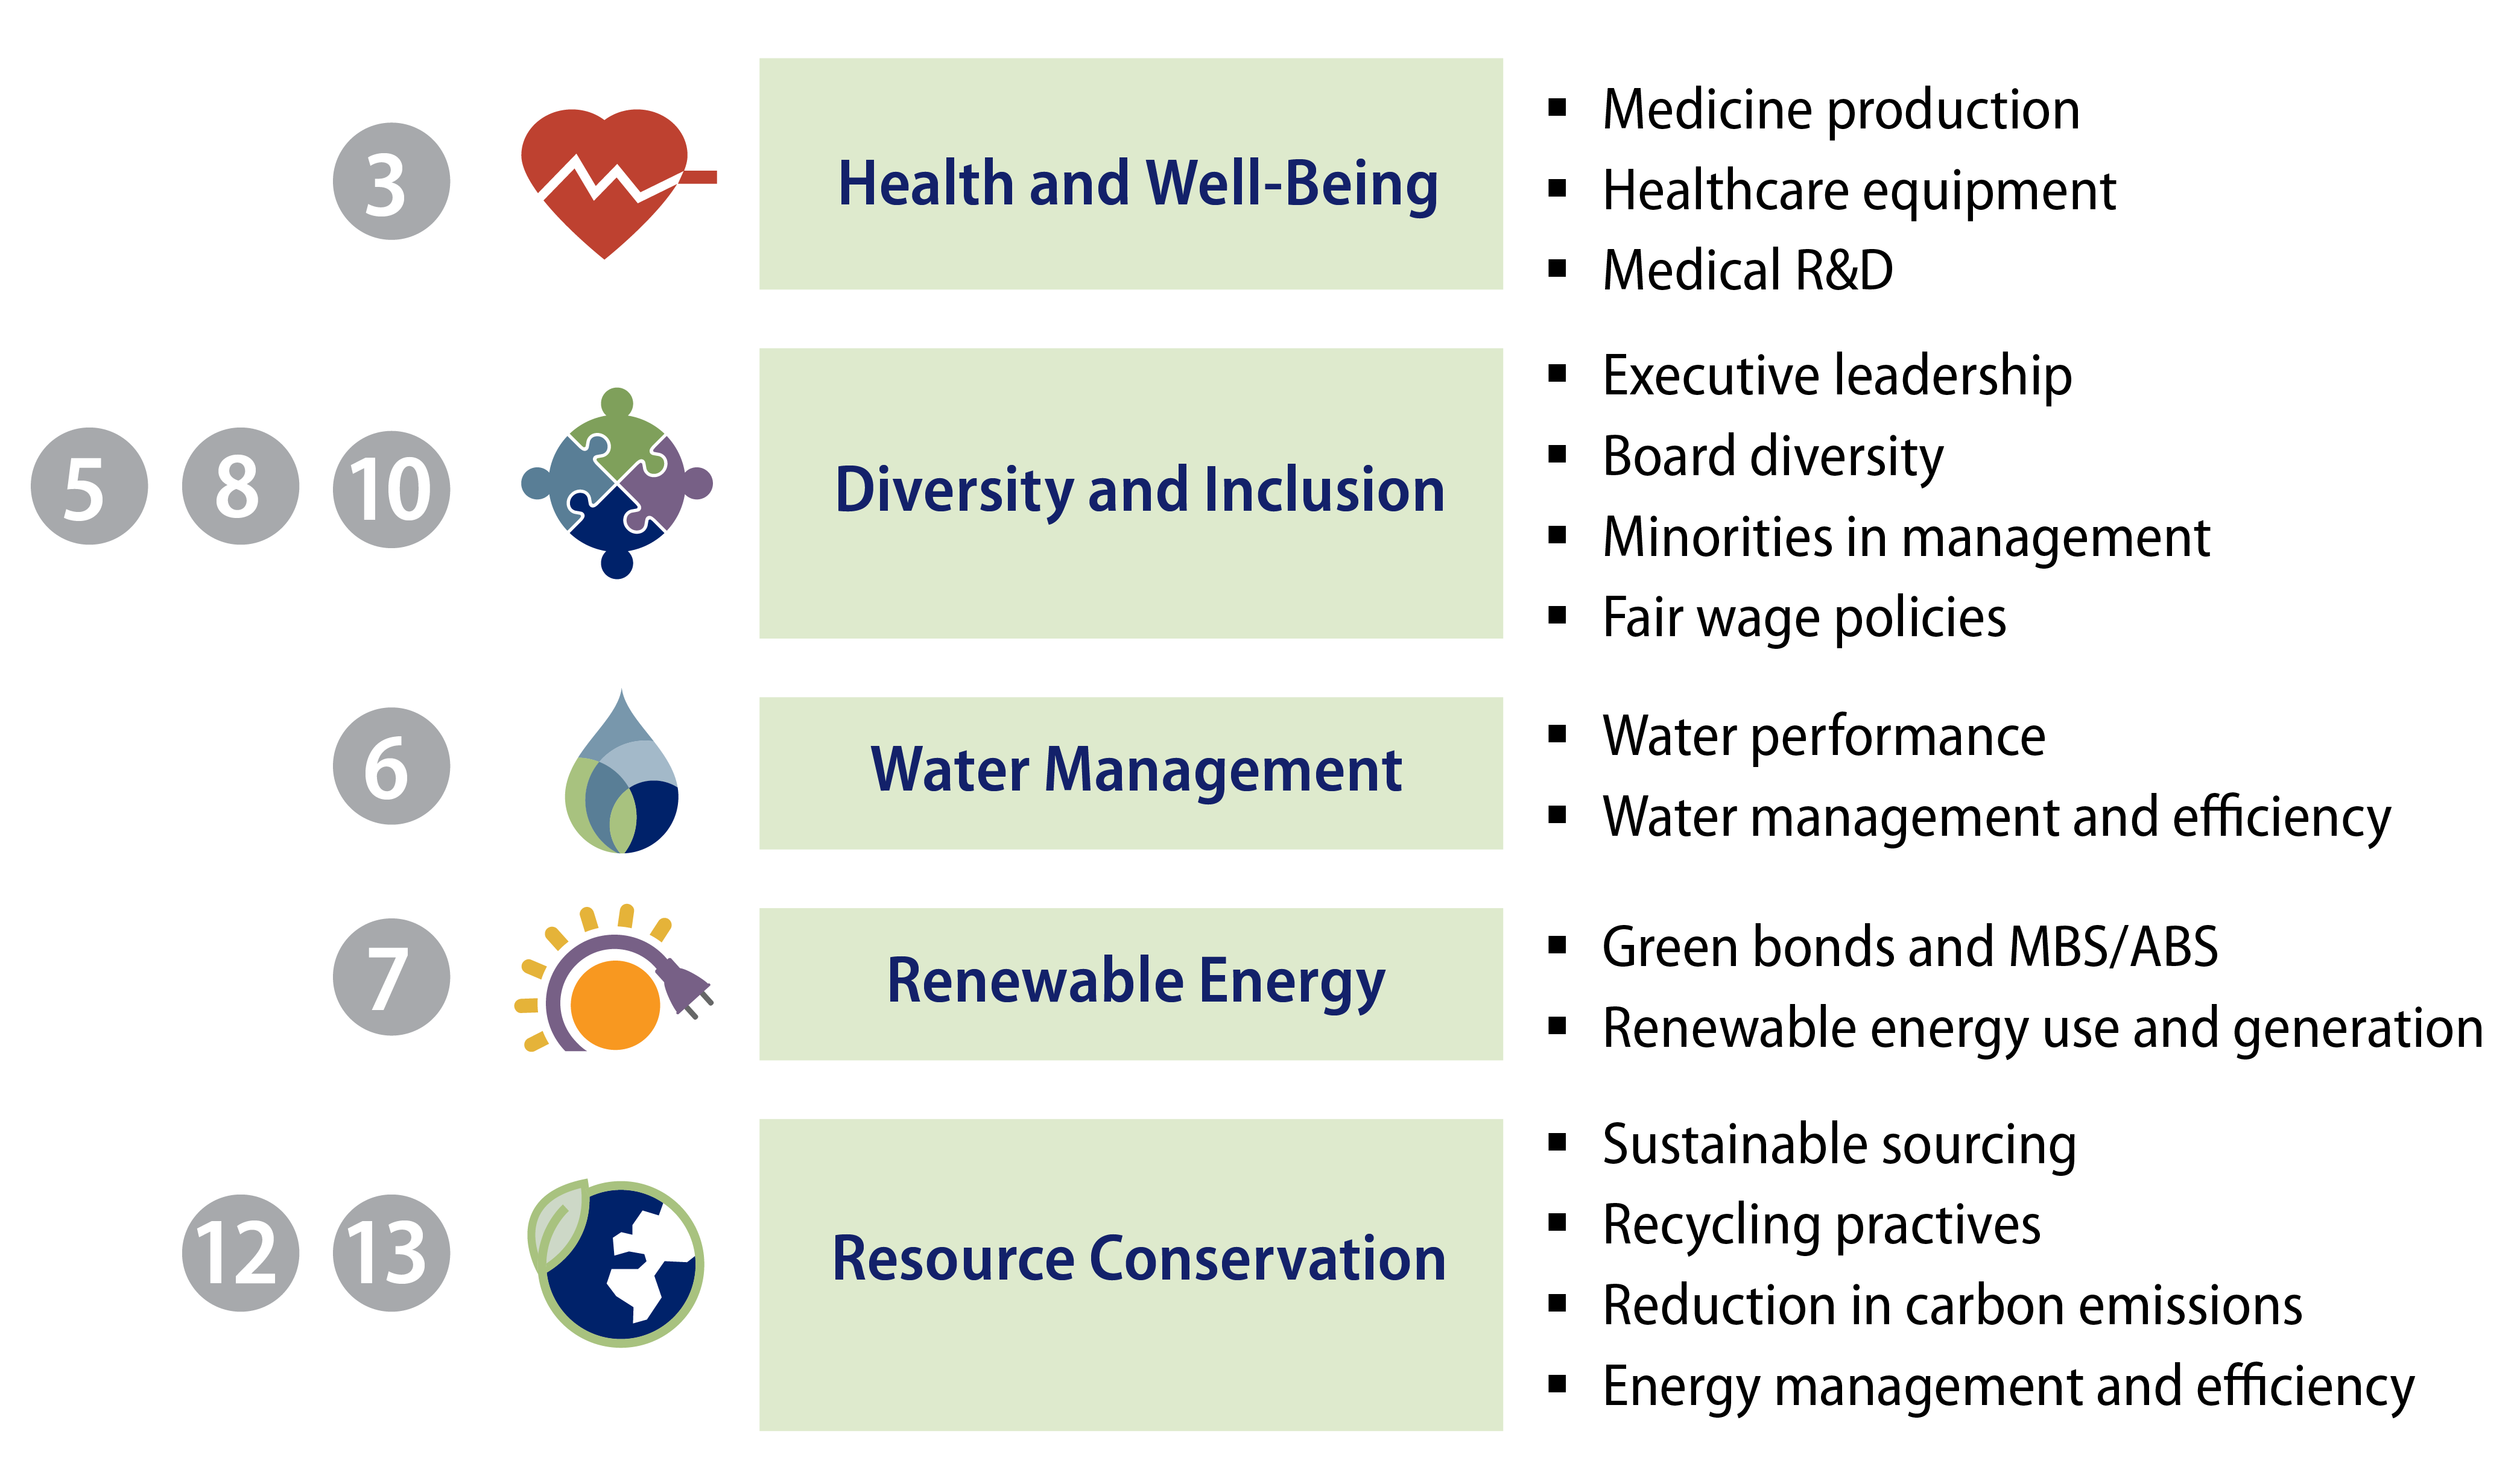 Environmental and Social Investment Themes